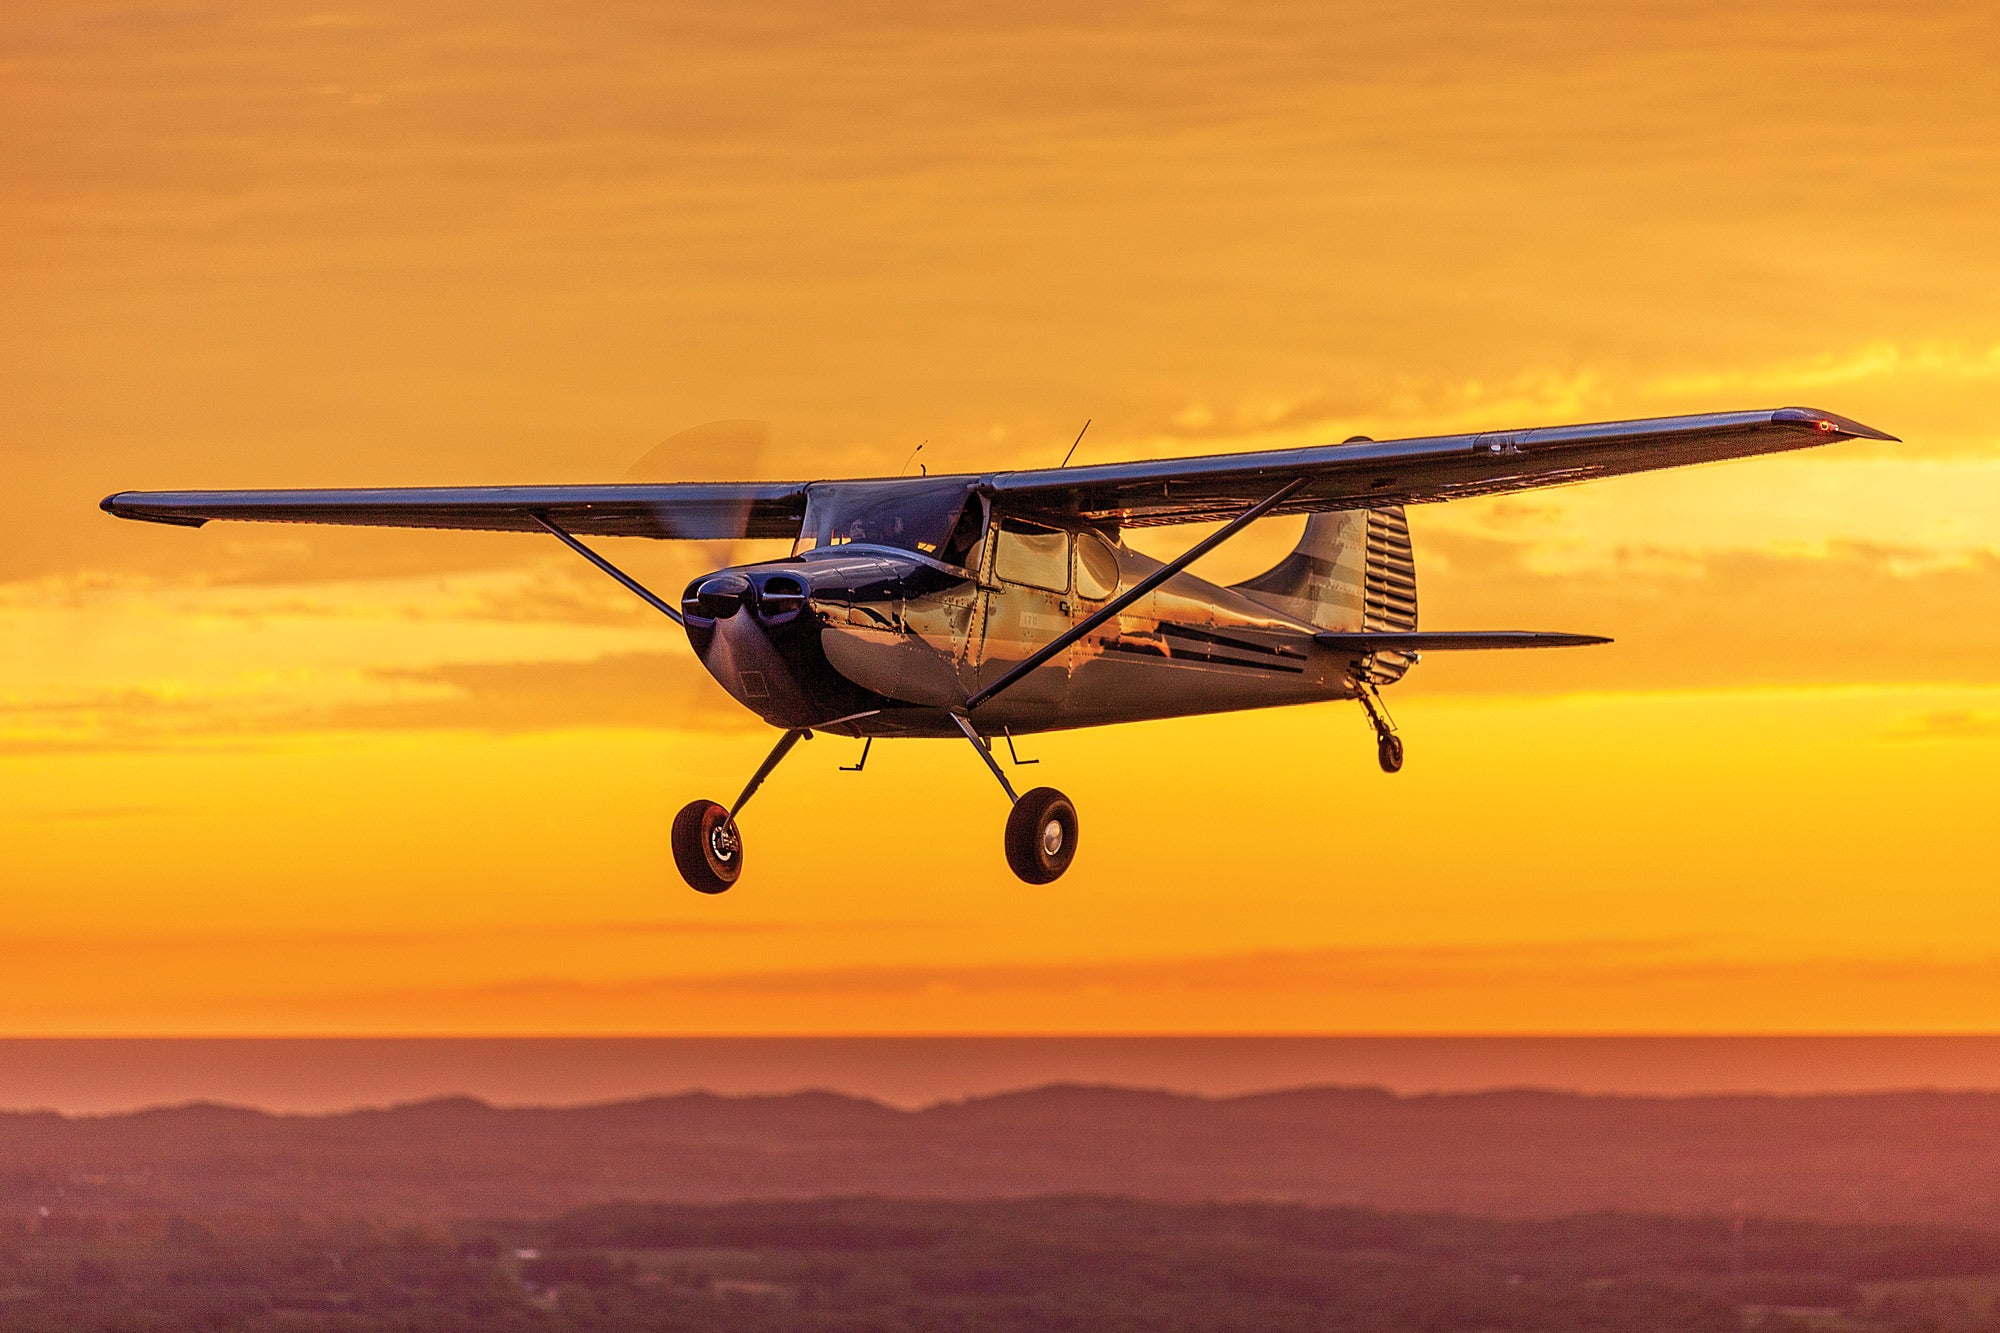 The Cessna 170 Is a Ticket to Adventure